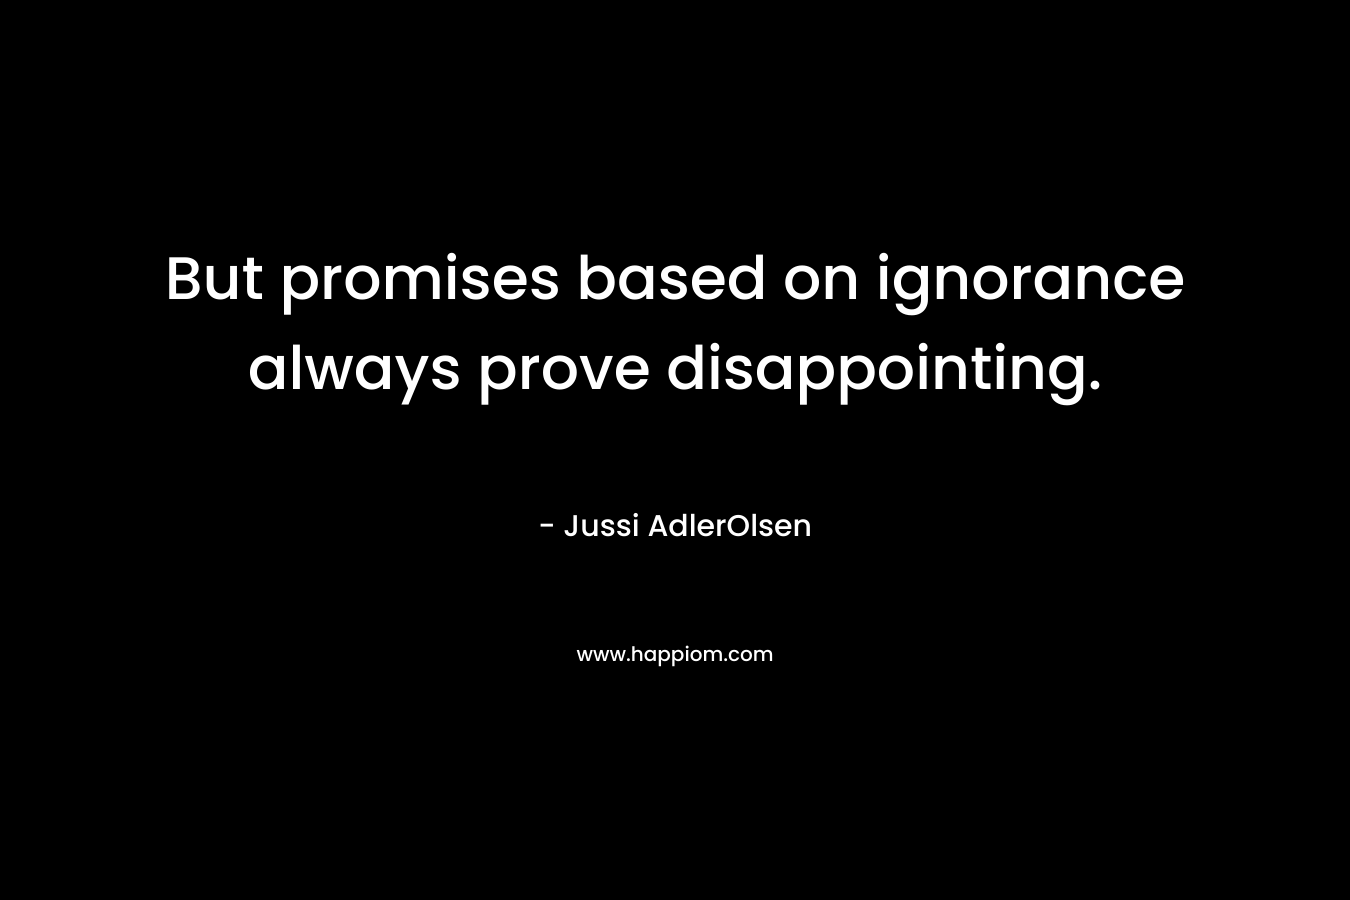 But promises based on ignorance always prove disappointing. – Jussi AdlerOlsen